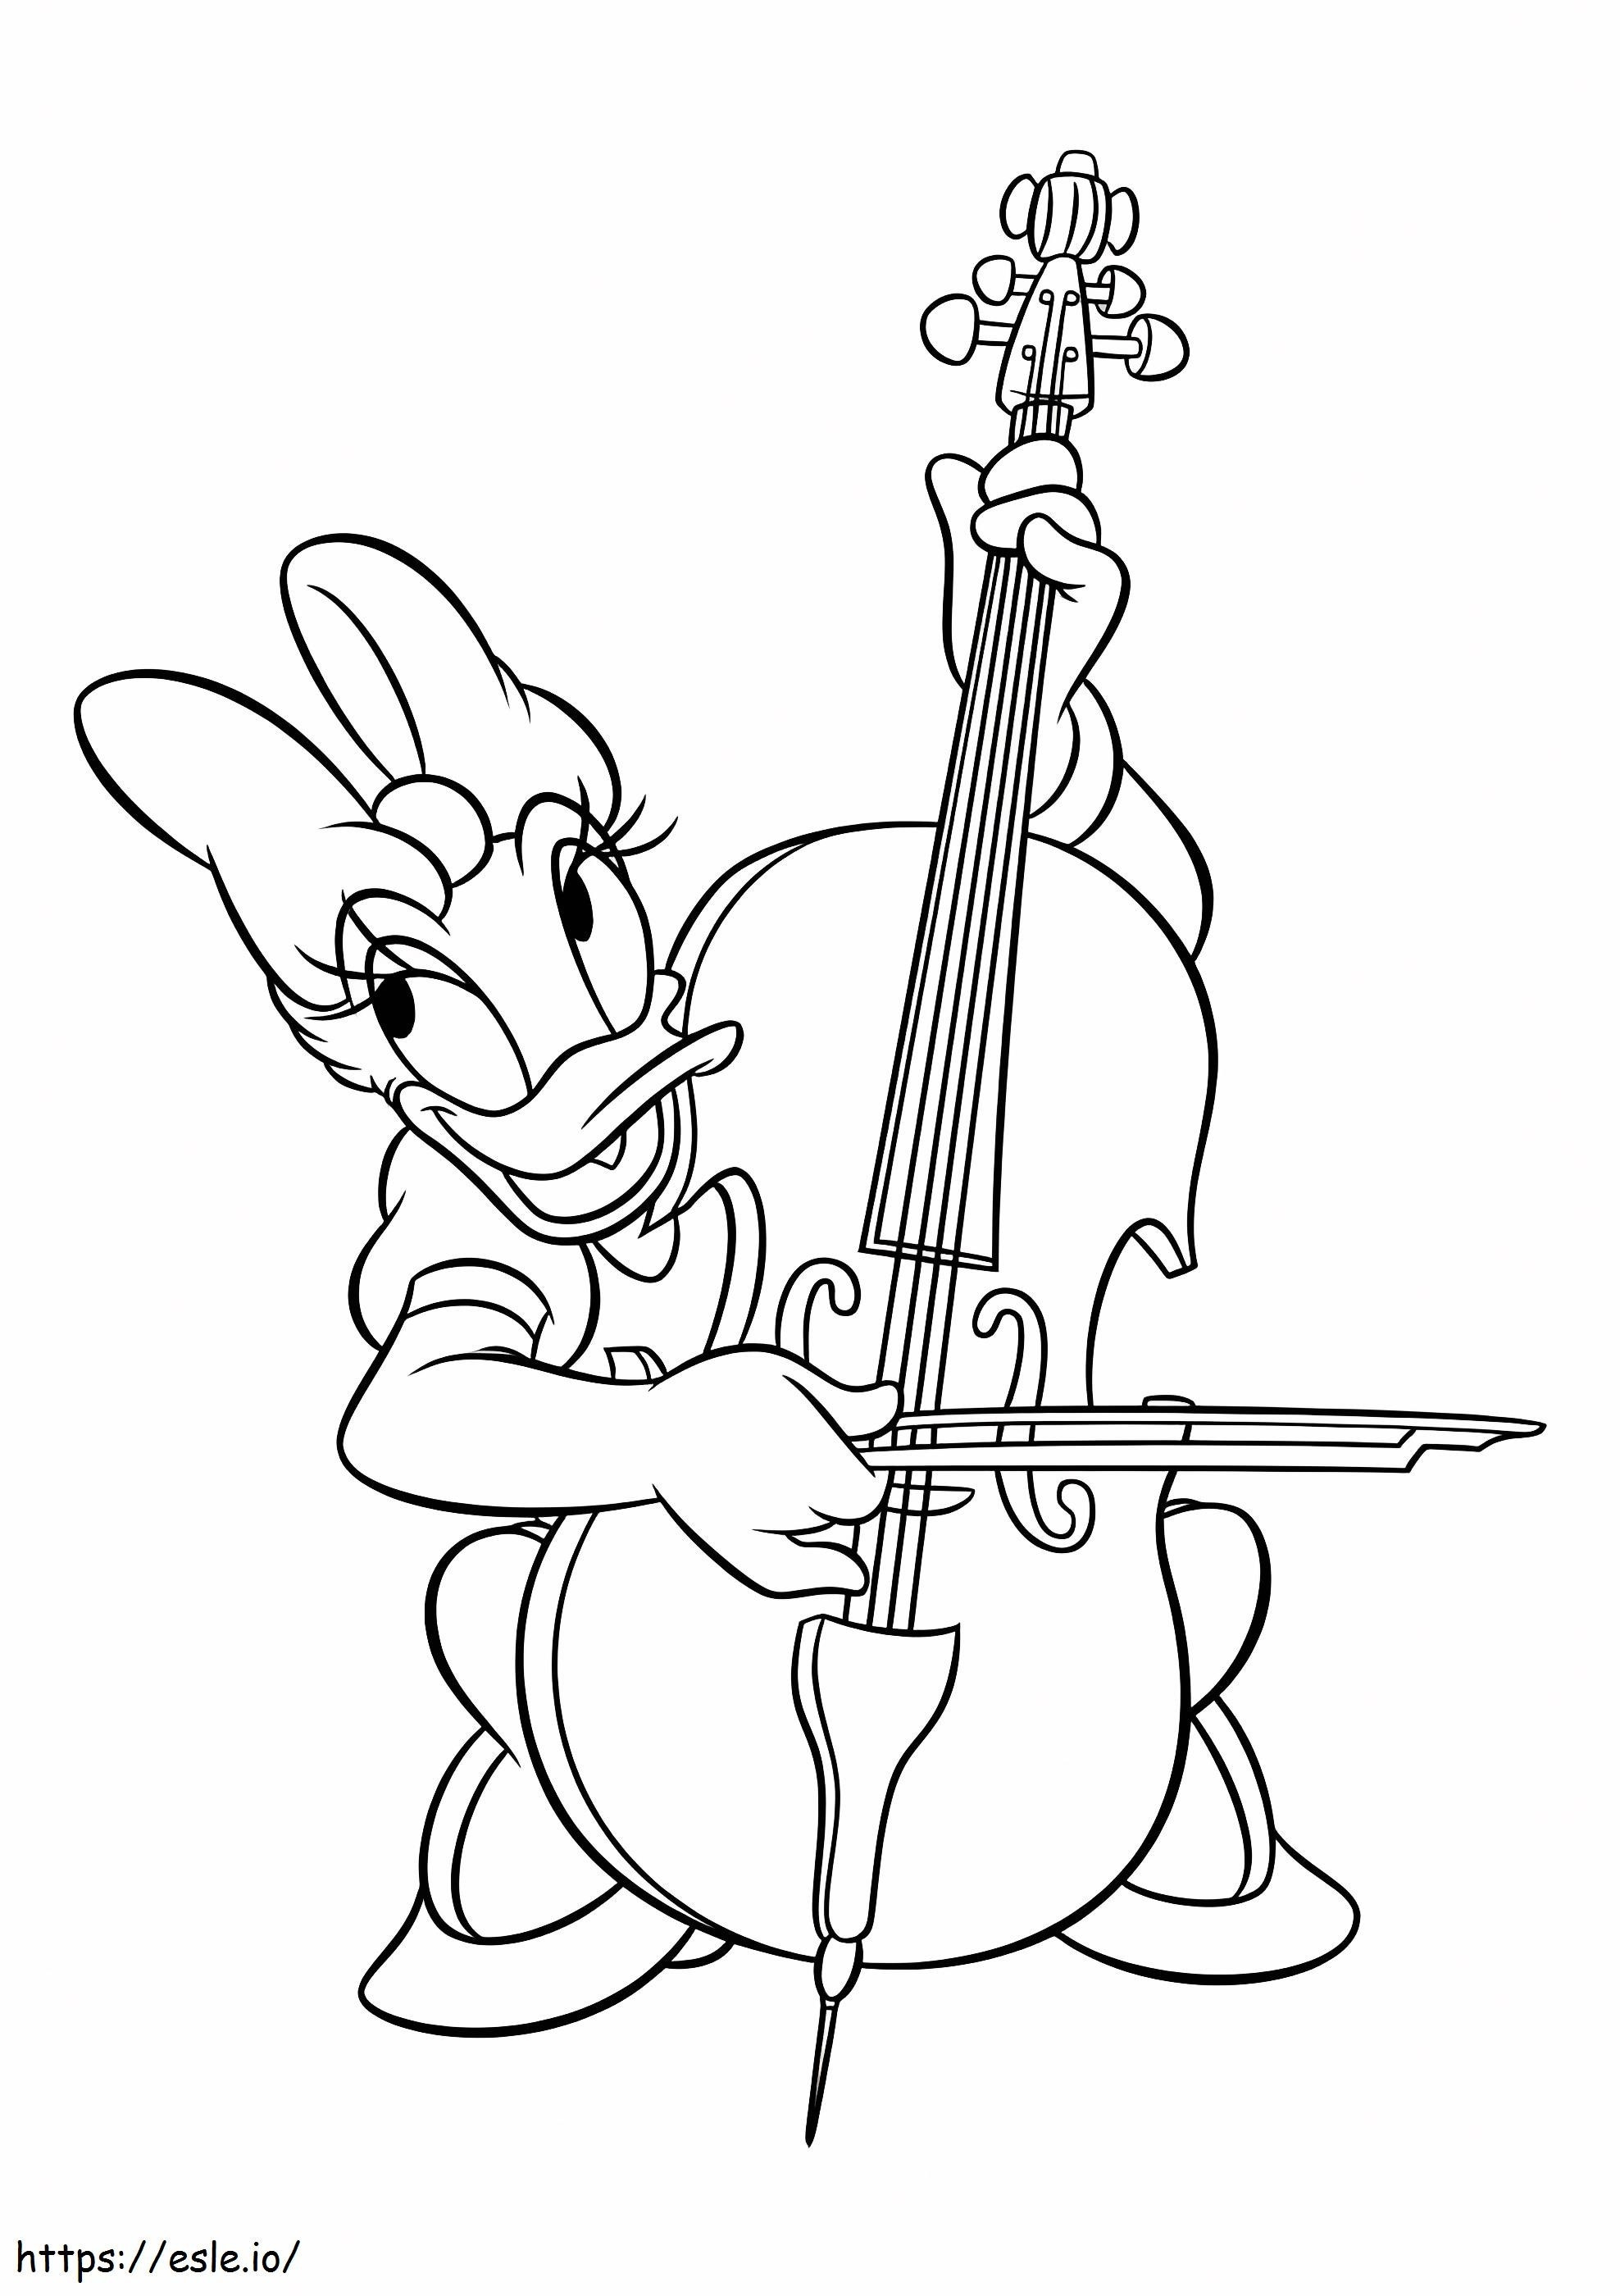 Daisy Duck Playing Cello coloring page